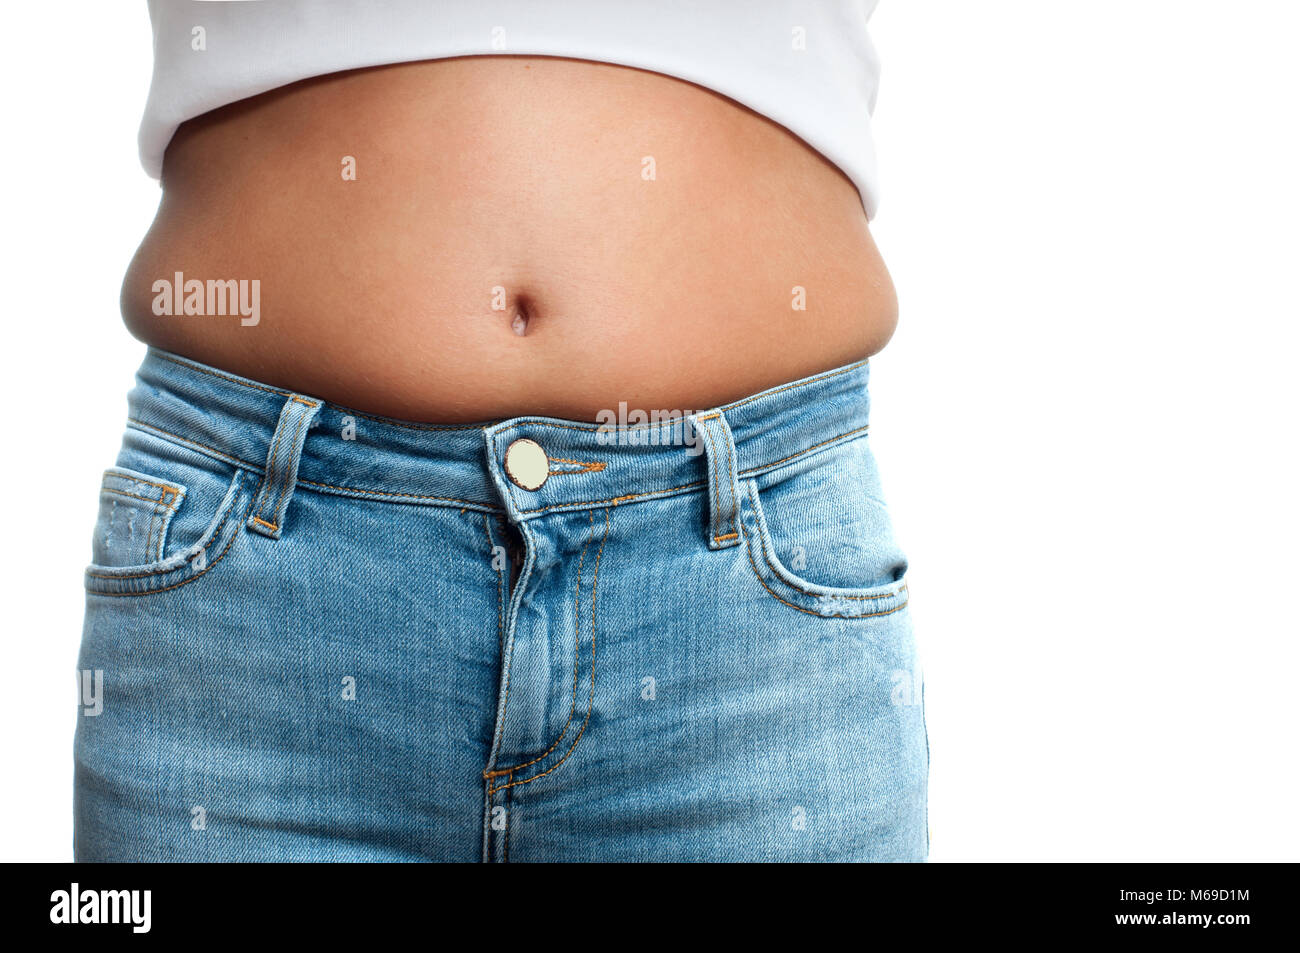 Overweight woman in jeans and fat on hips and belly Stock Photo - Alamy